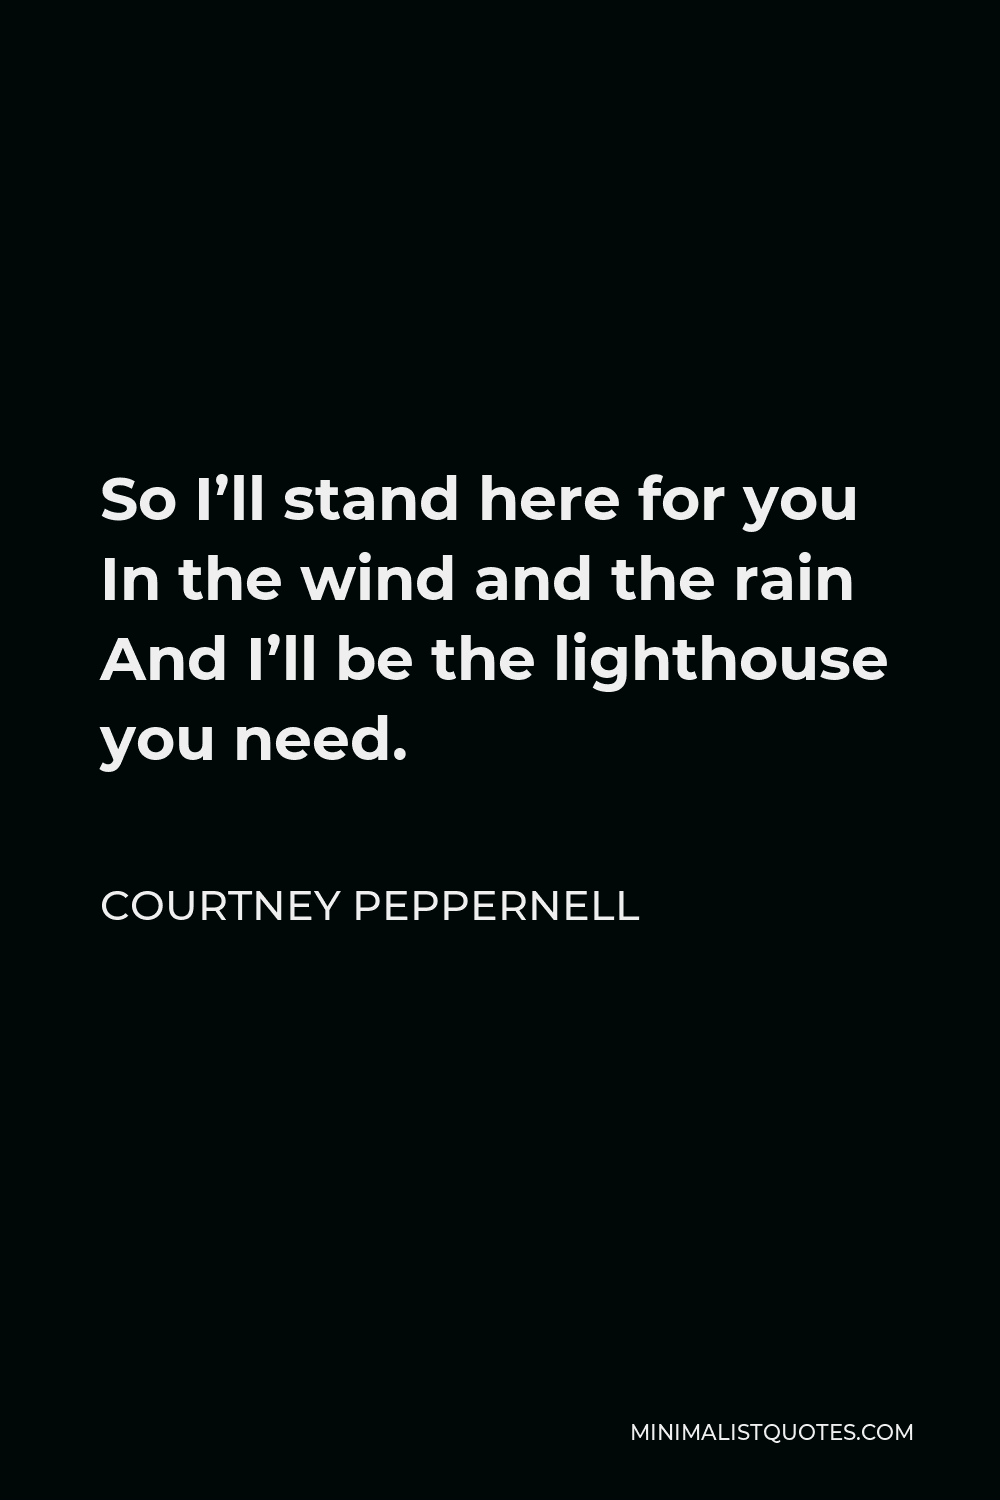 Courtney Peppernell Quote - So I’ll stand here for you In the wind and the rain And I’ll be the lighthouse you need.